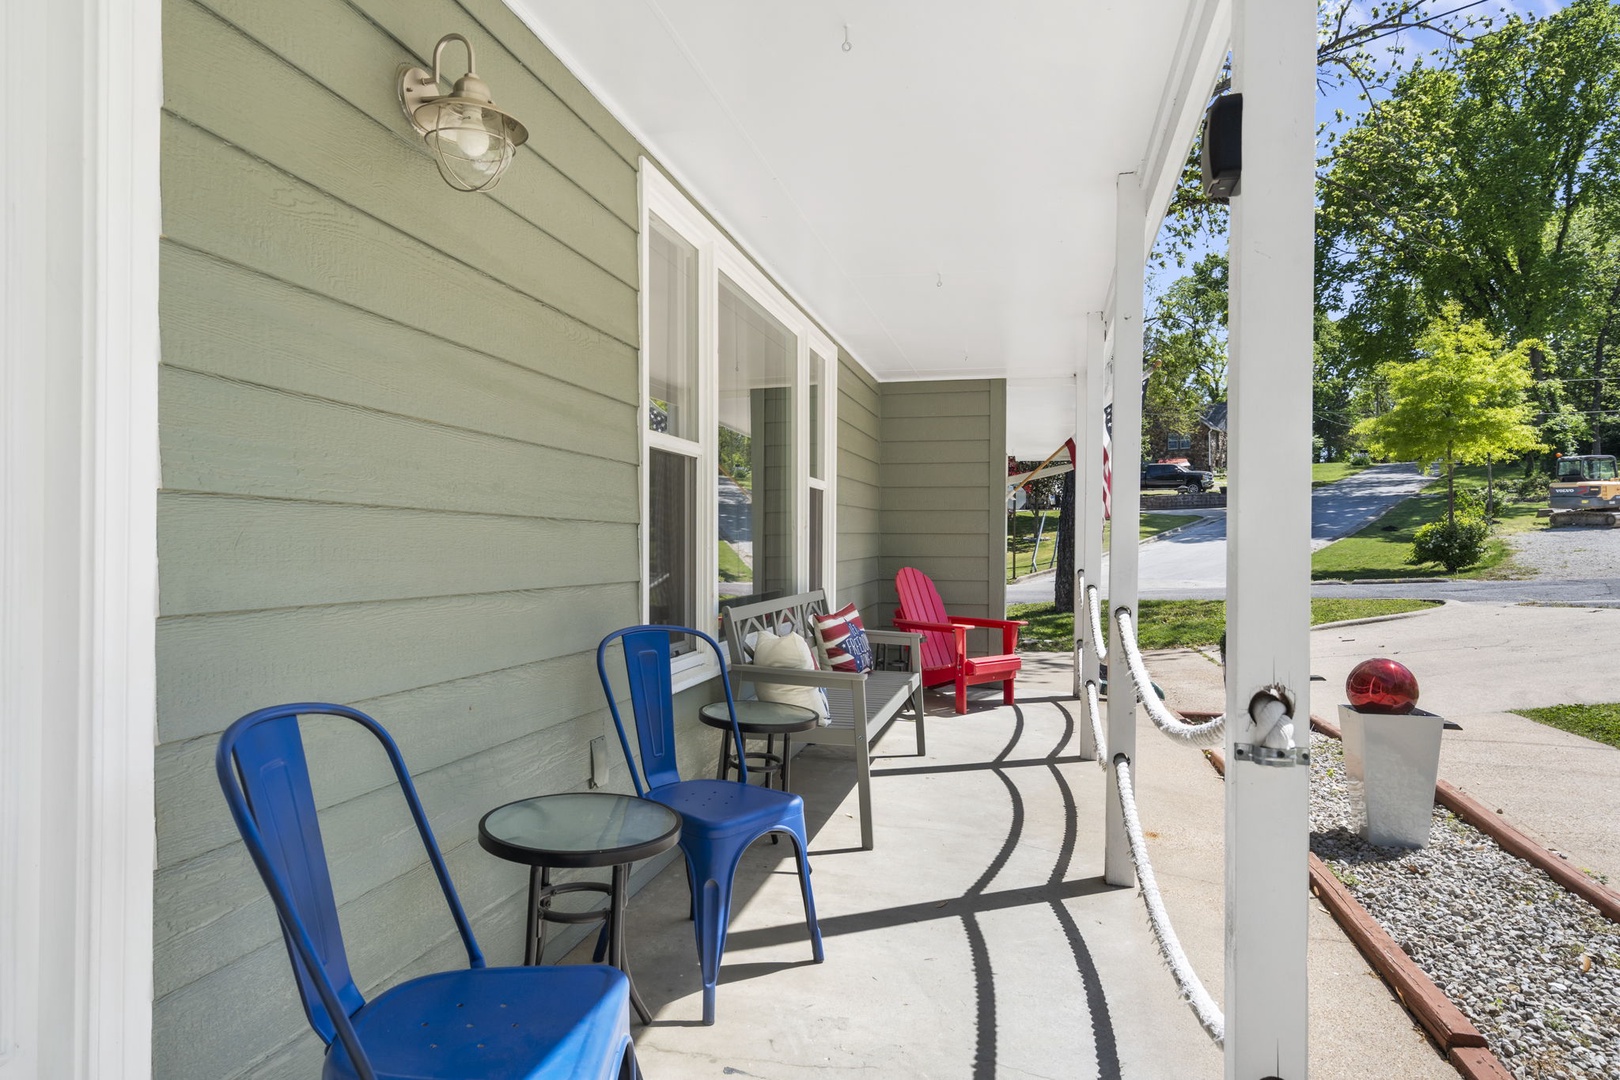 Sit back & relax in the fresh air on the front porch